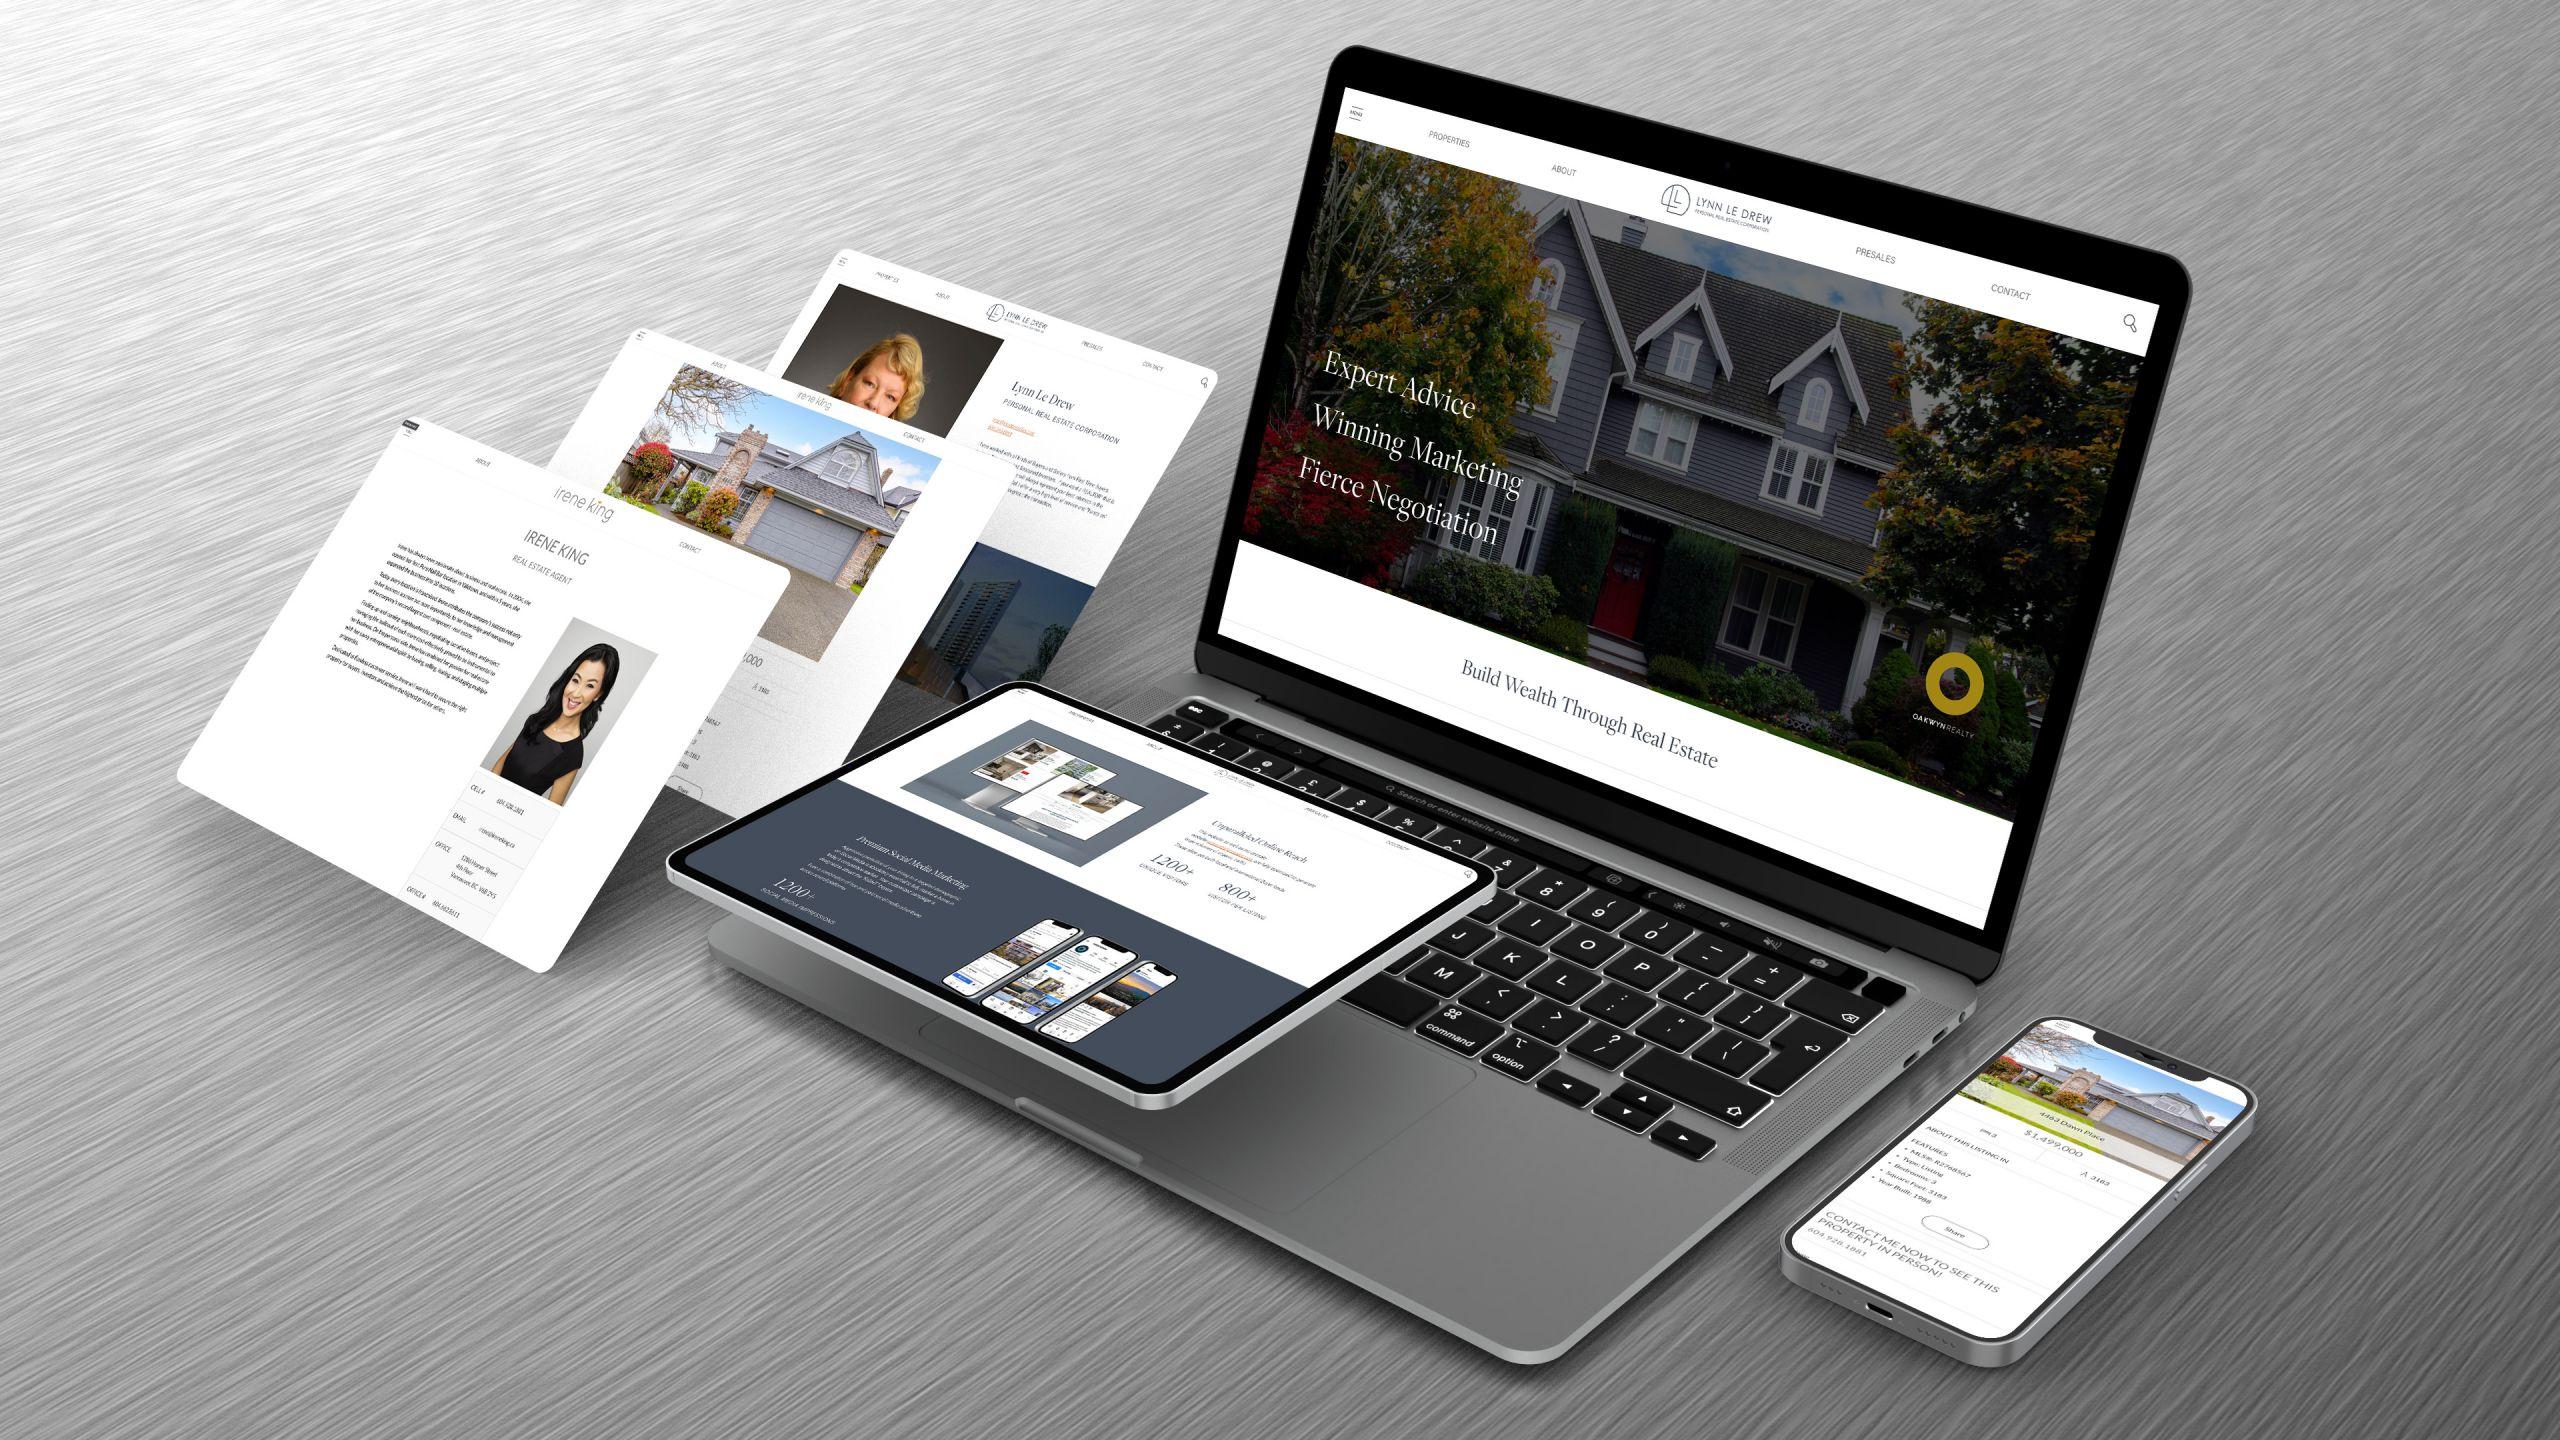 Several more Oakwyn Realty agents' websites designed over the years